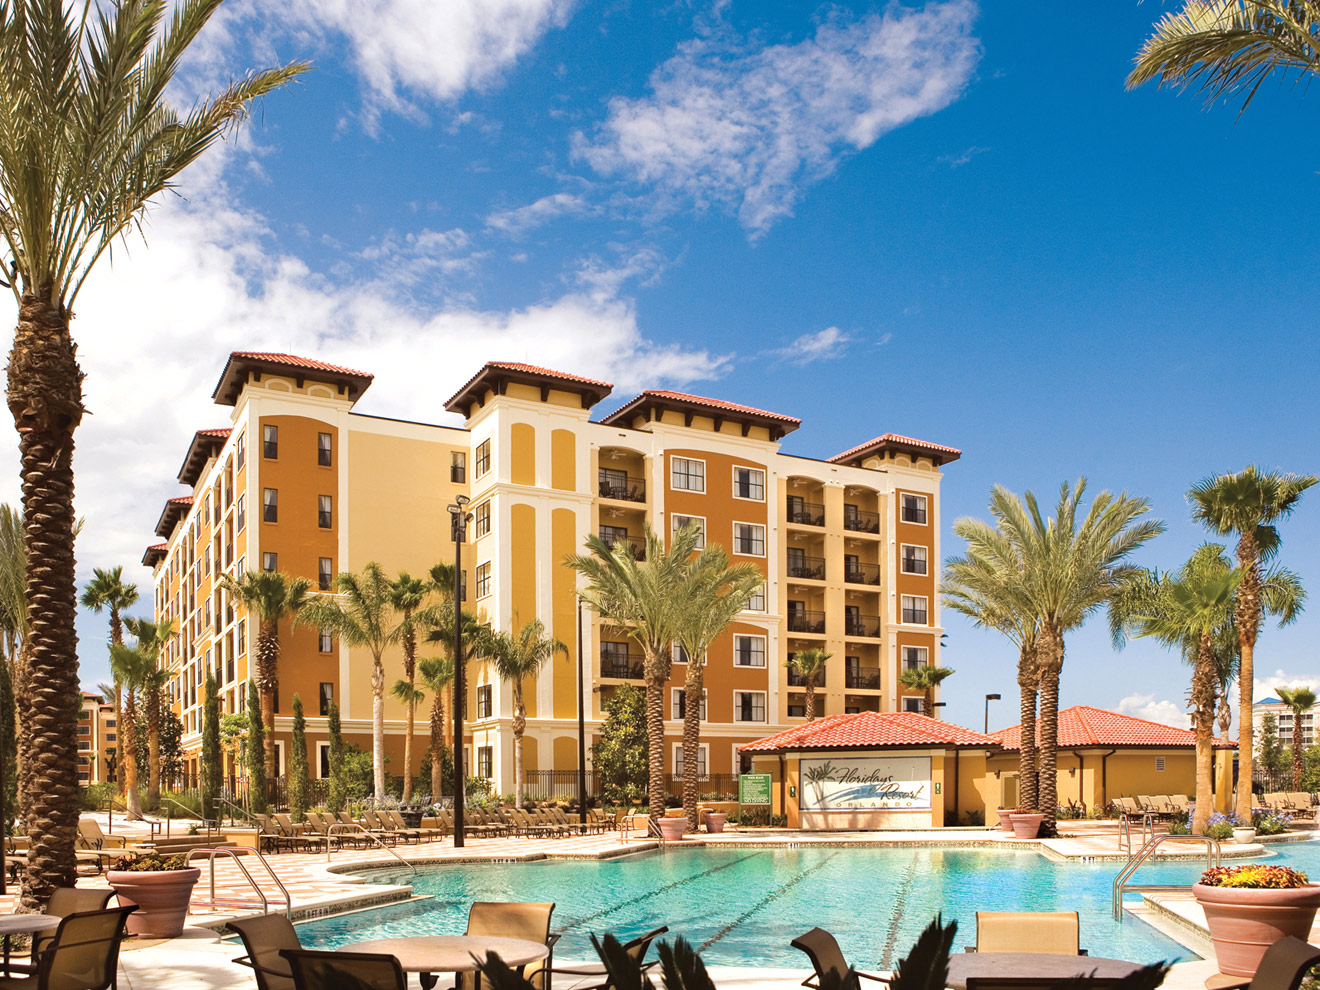 Great Deals on Your Stay at Floridays Resort Orlando near 